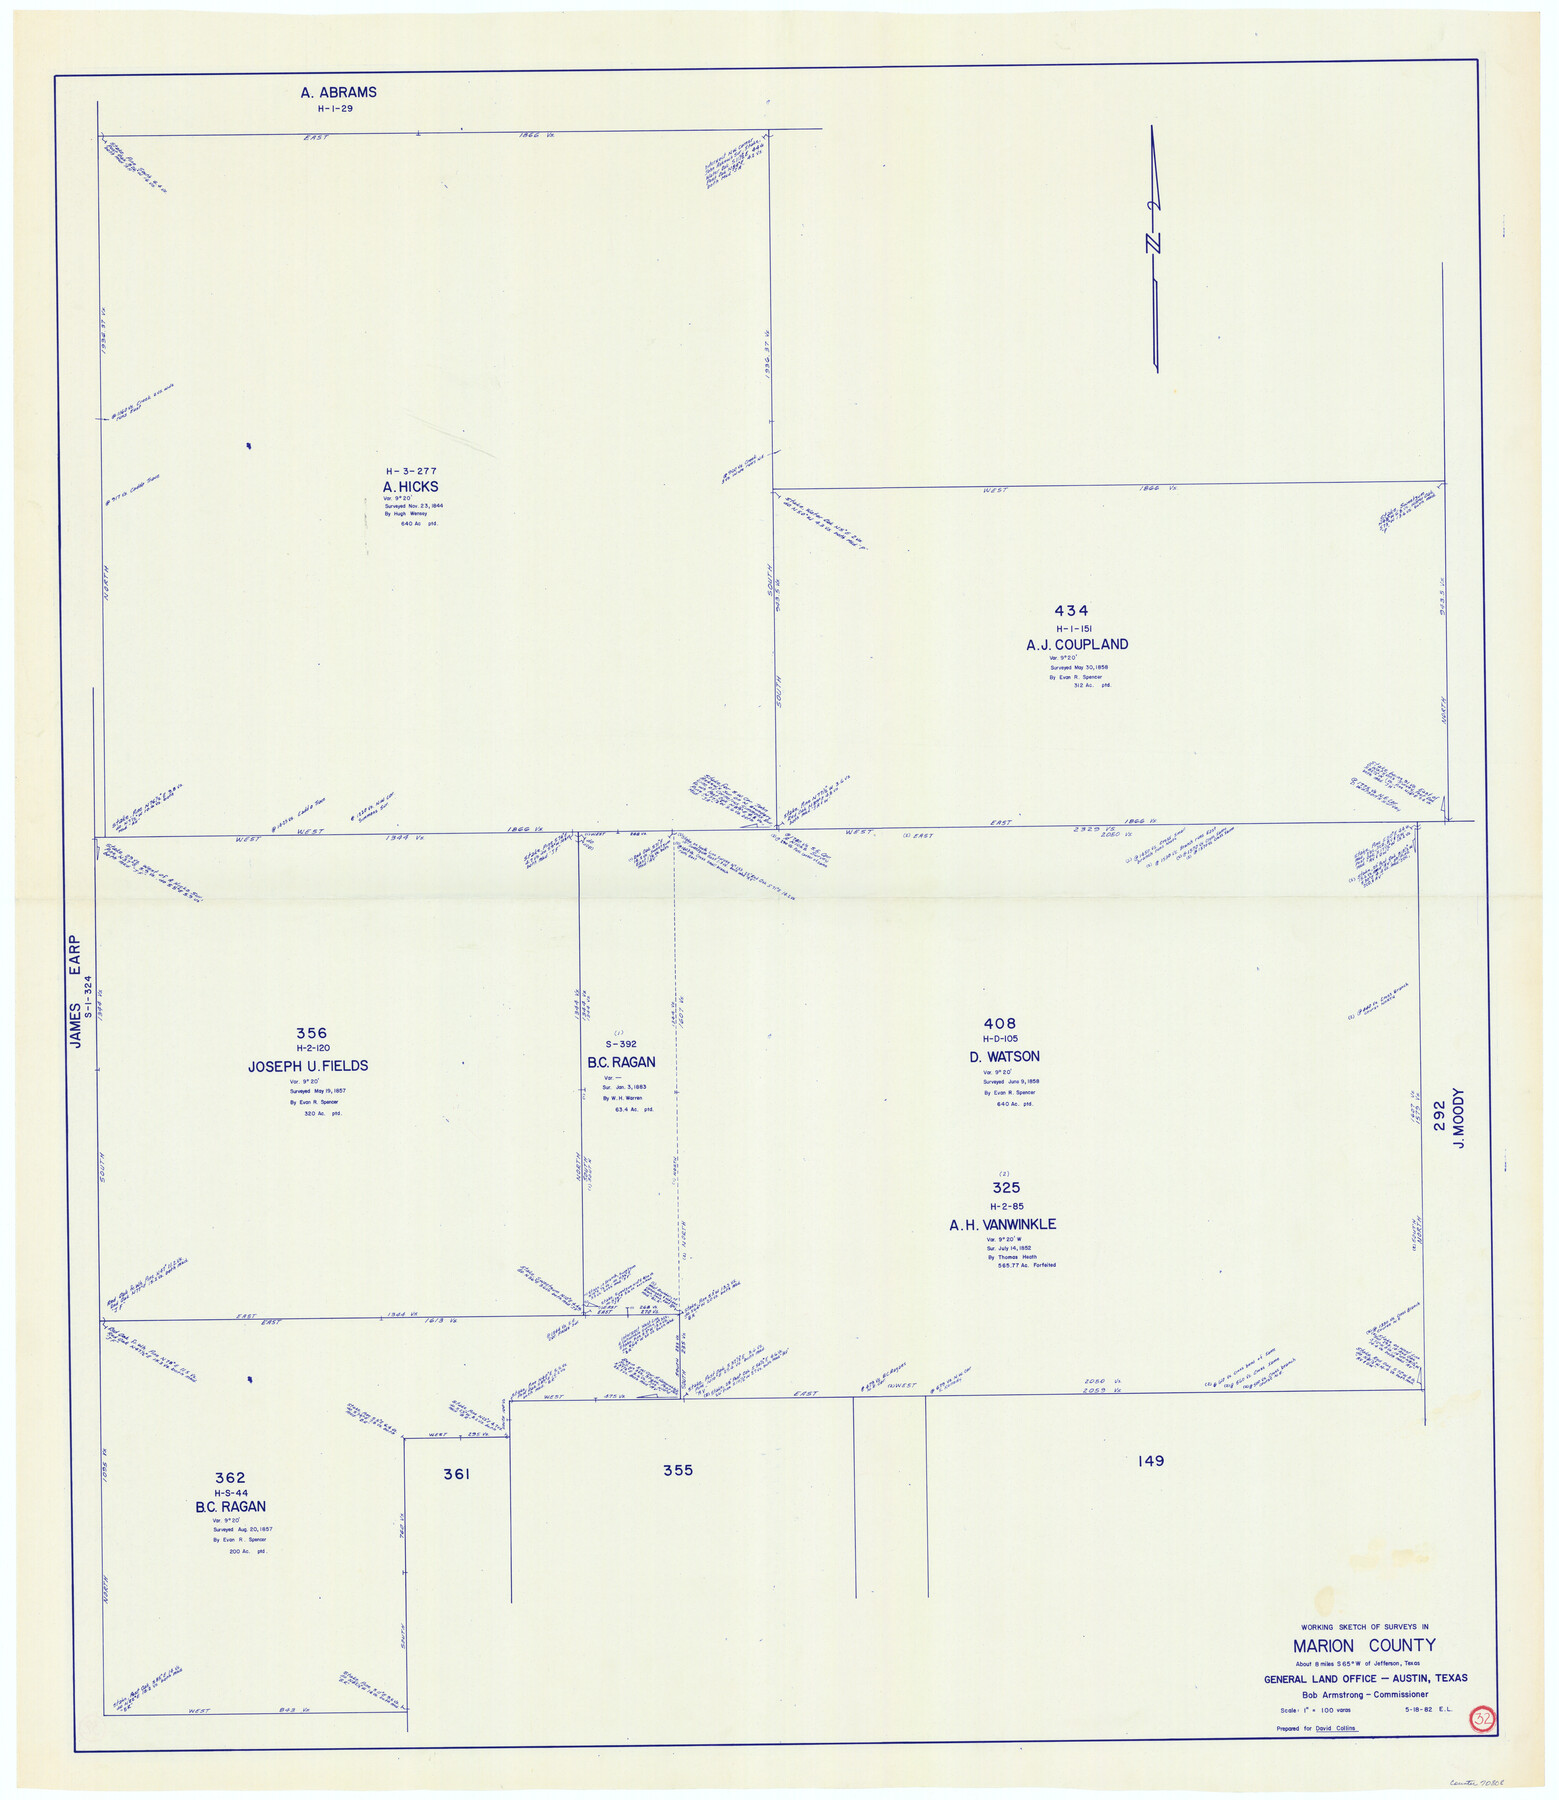 70808, Marion County Working Sketch 32, General Map Collection